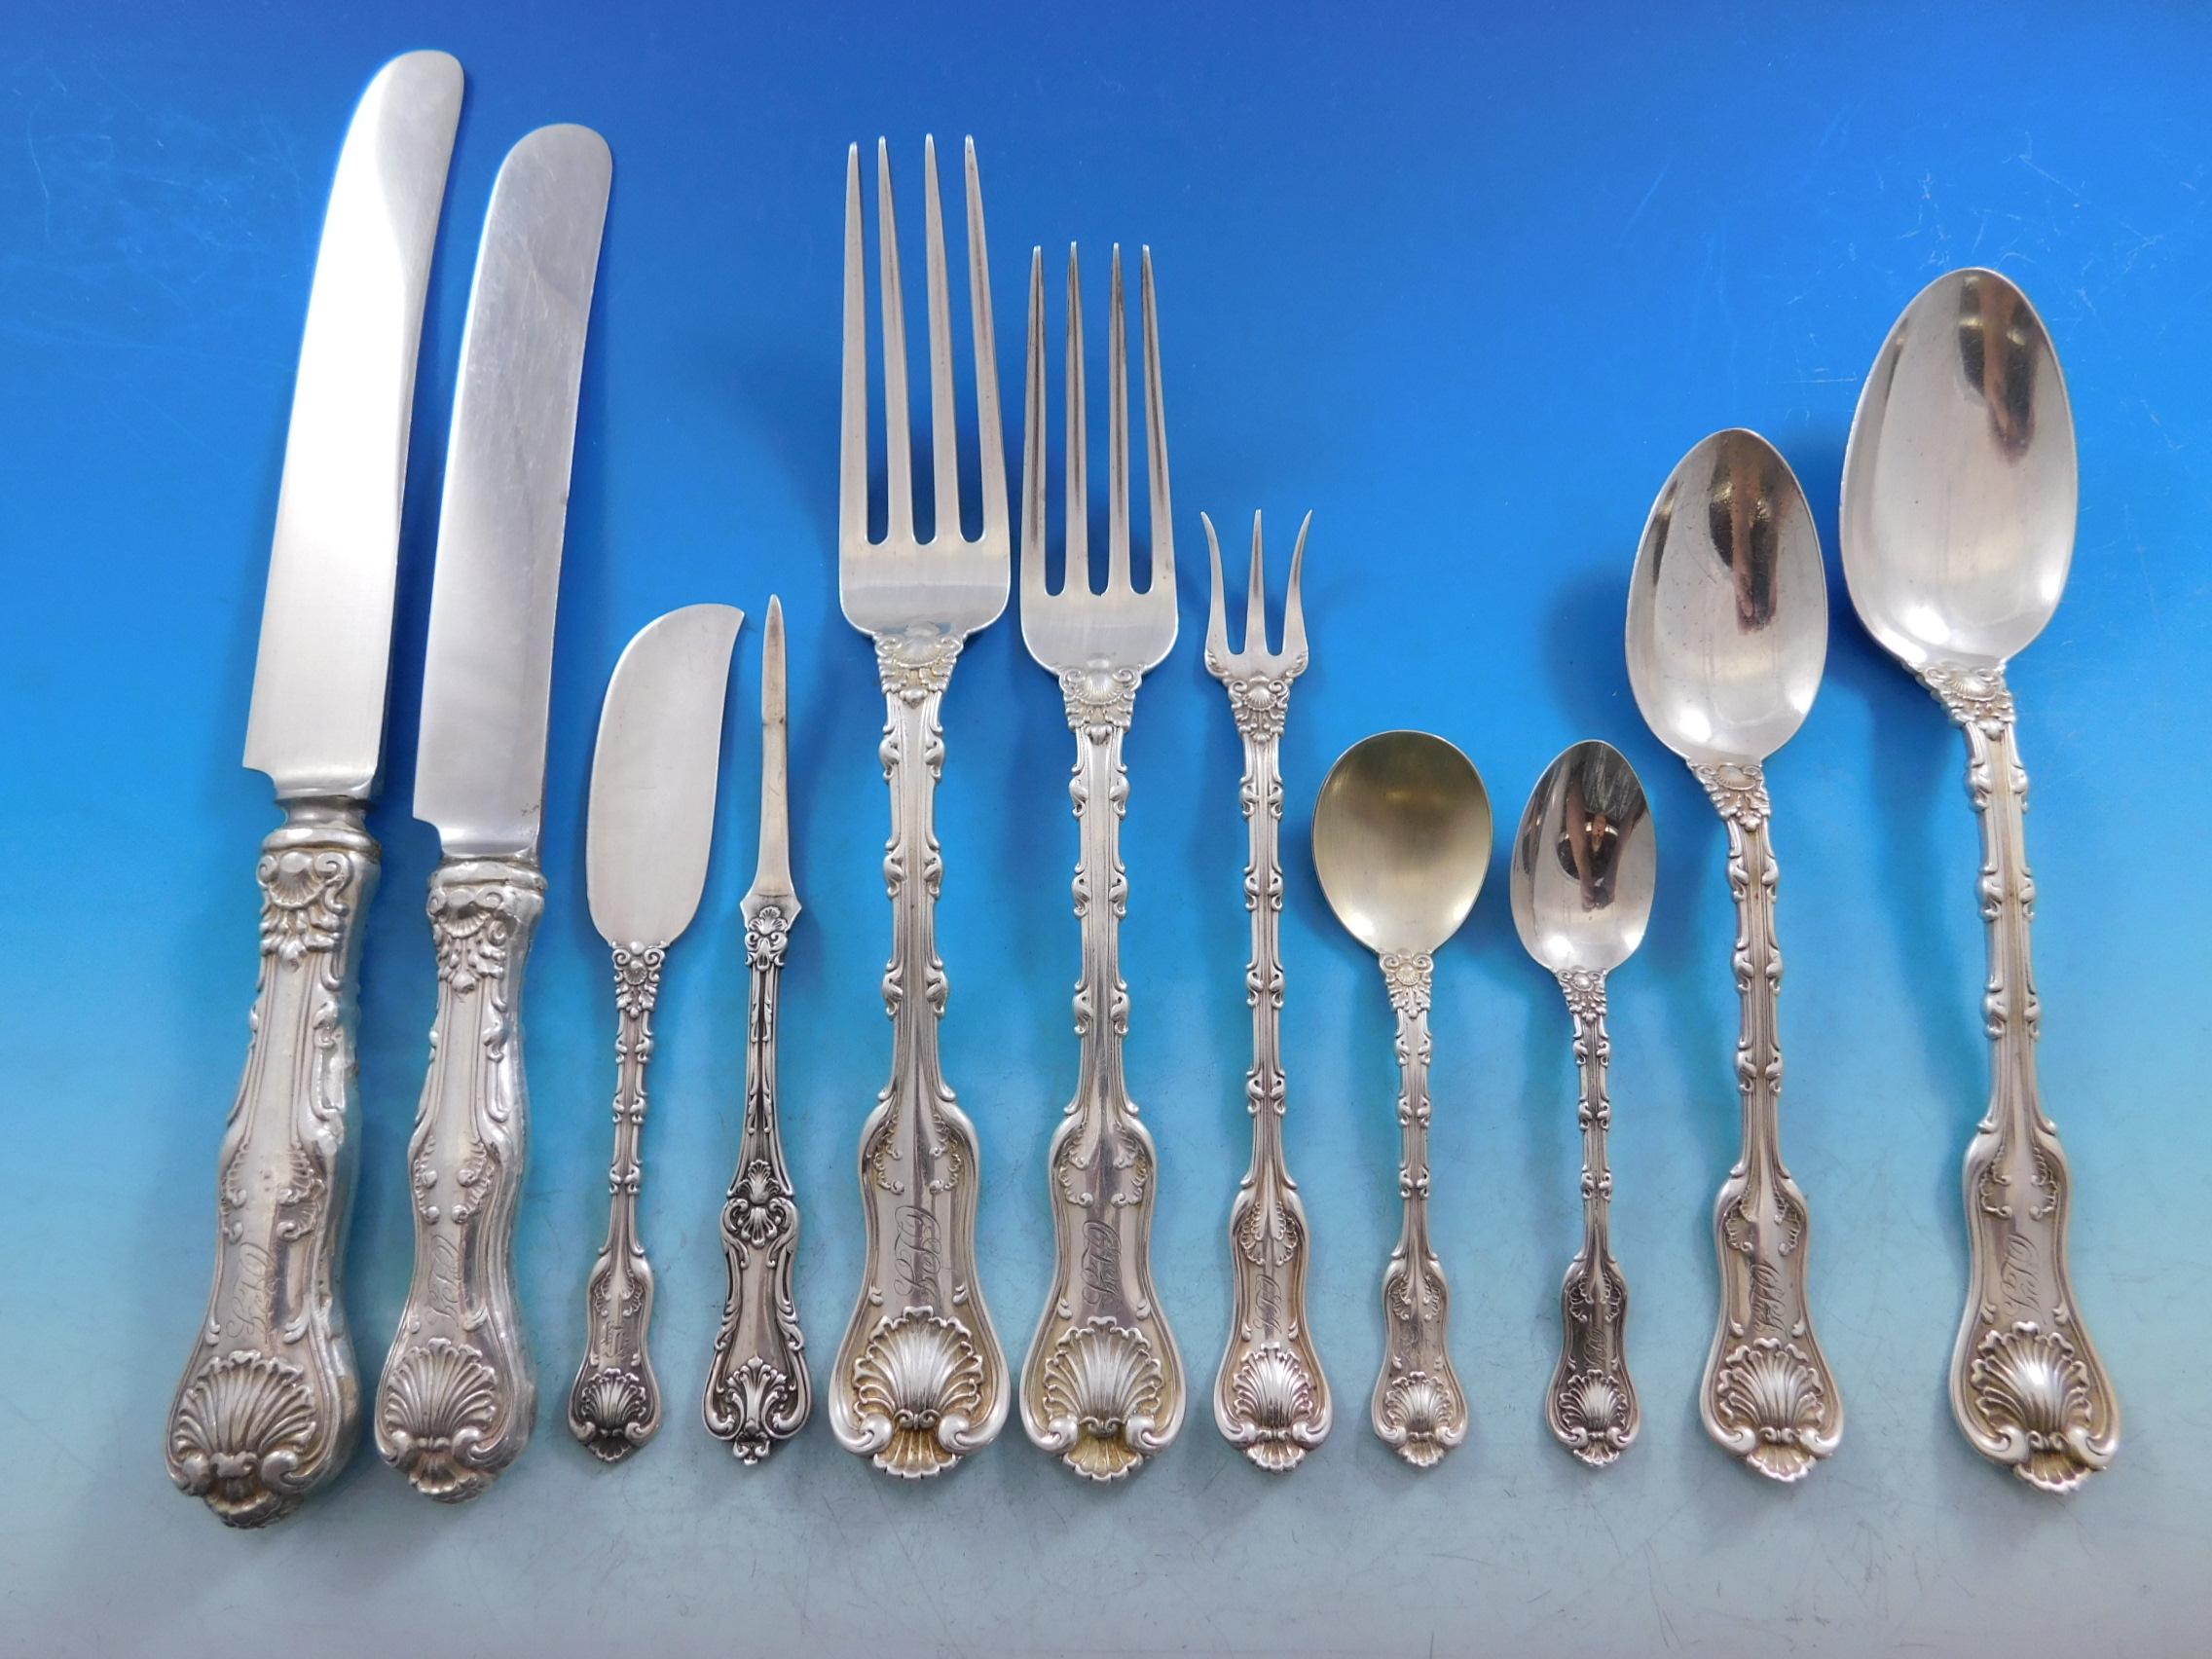 Superb Imperial Queen by Whiting sterling silver flatware set - 167 pieces including many fabulous serving pieces. The classic shell motif pattern was designed by Charles Osborn and was introduced in the year 1893. This set includes:

12 dinner